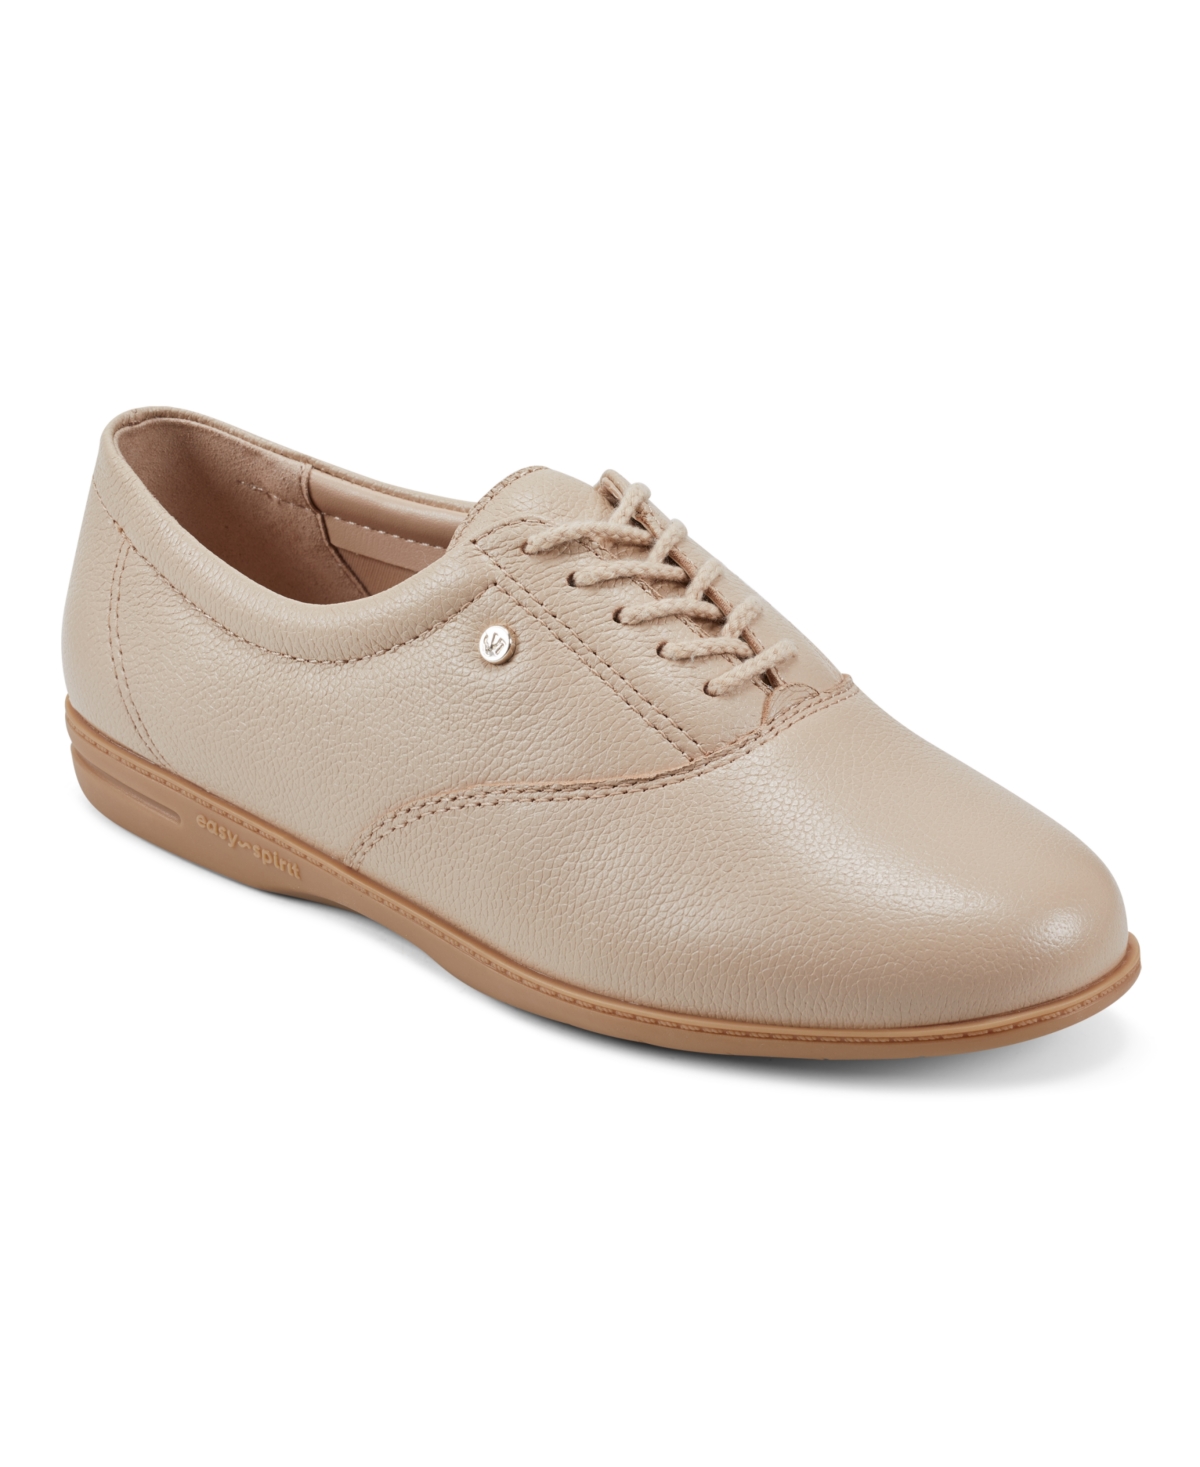 Motion Round Toe Casual Oxfords Flats - Light Natural Leather